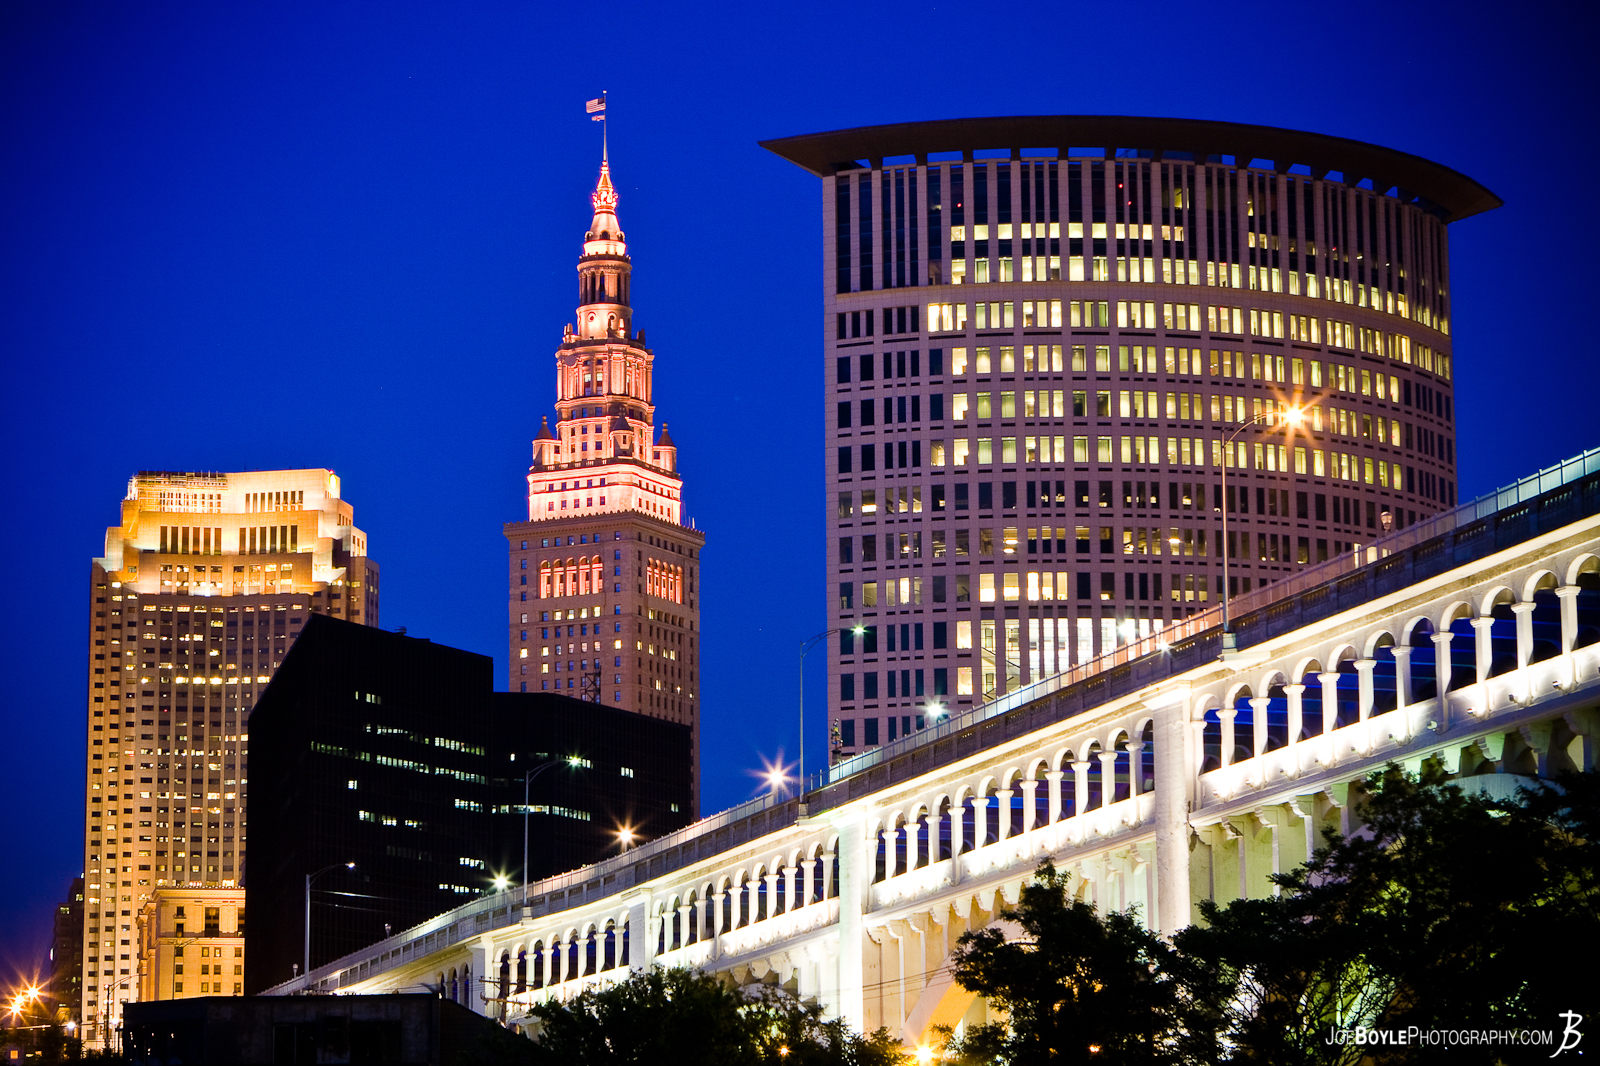  This photo is of the Cleveland Skyline with the Veterans Memorial Bridge. From left to right the 3 tallest buildings are: The BP-Huntington Building, The Terminal Tower and the Justice Center. 